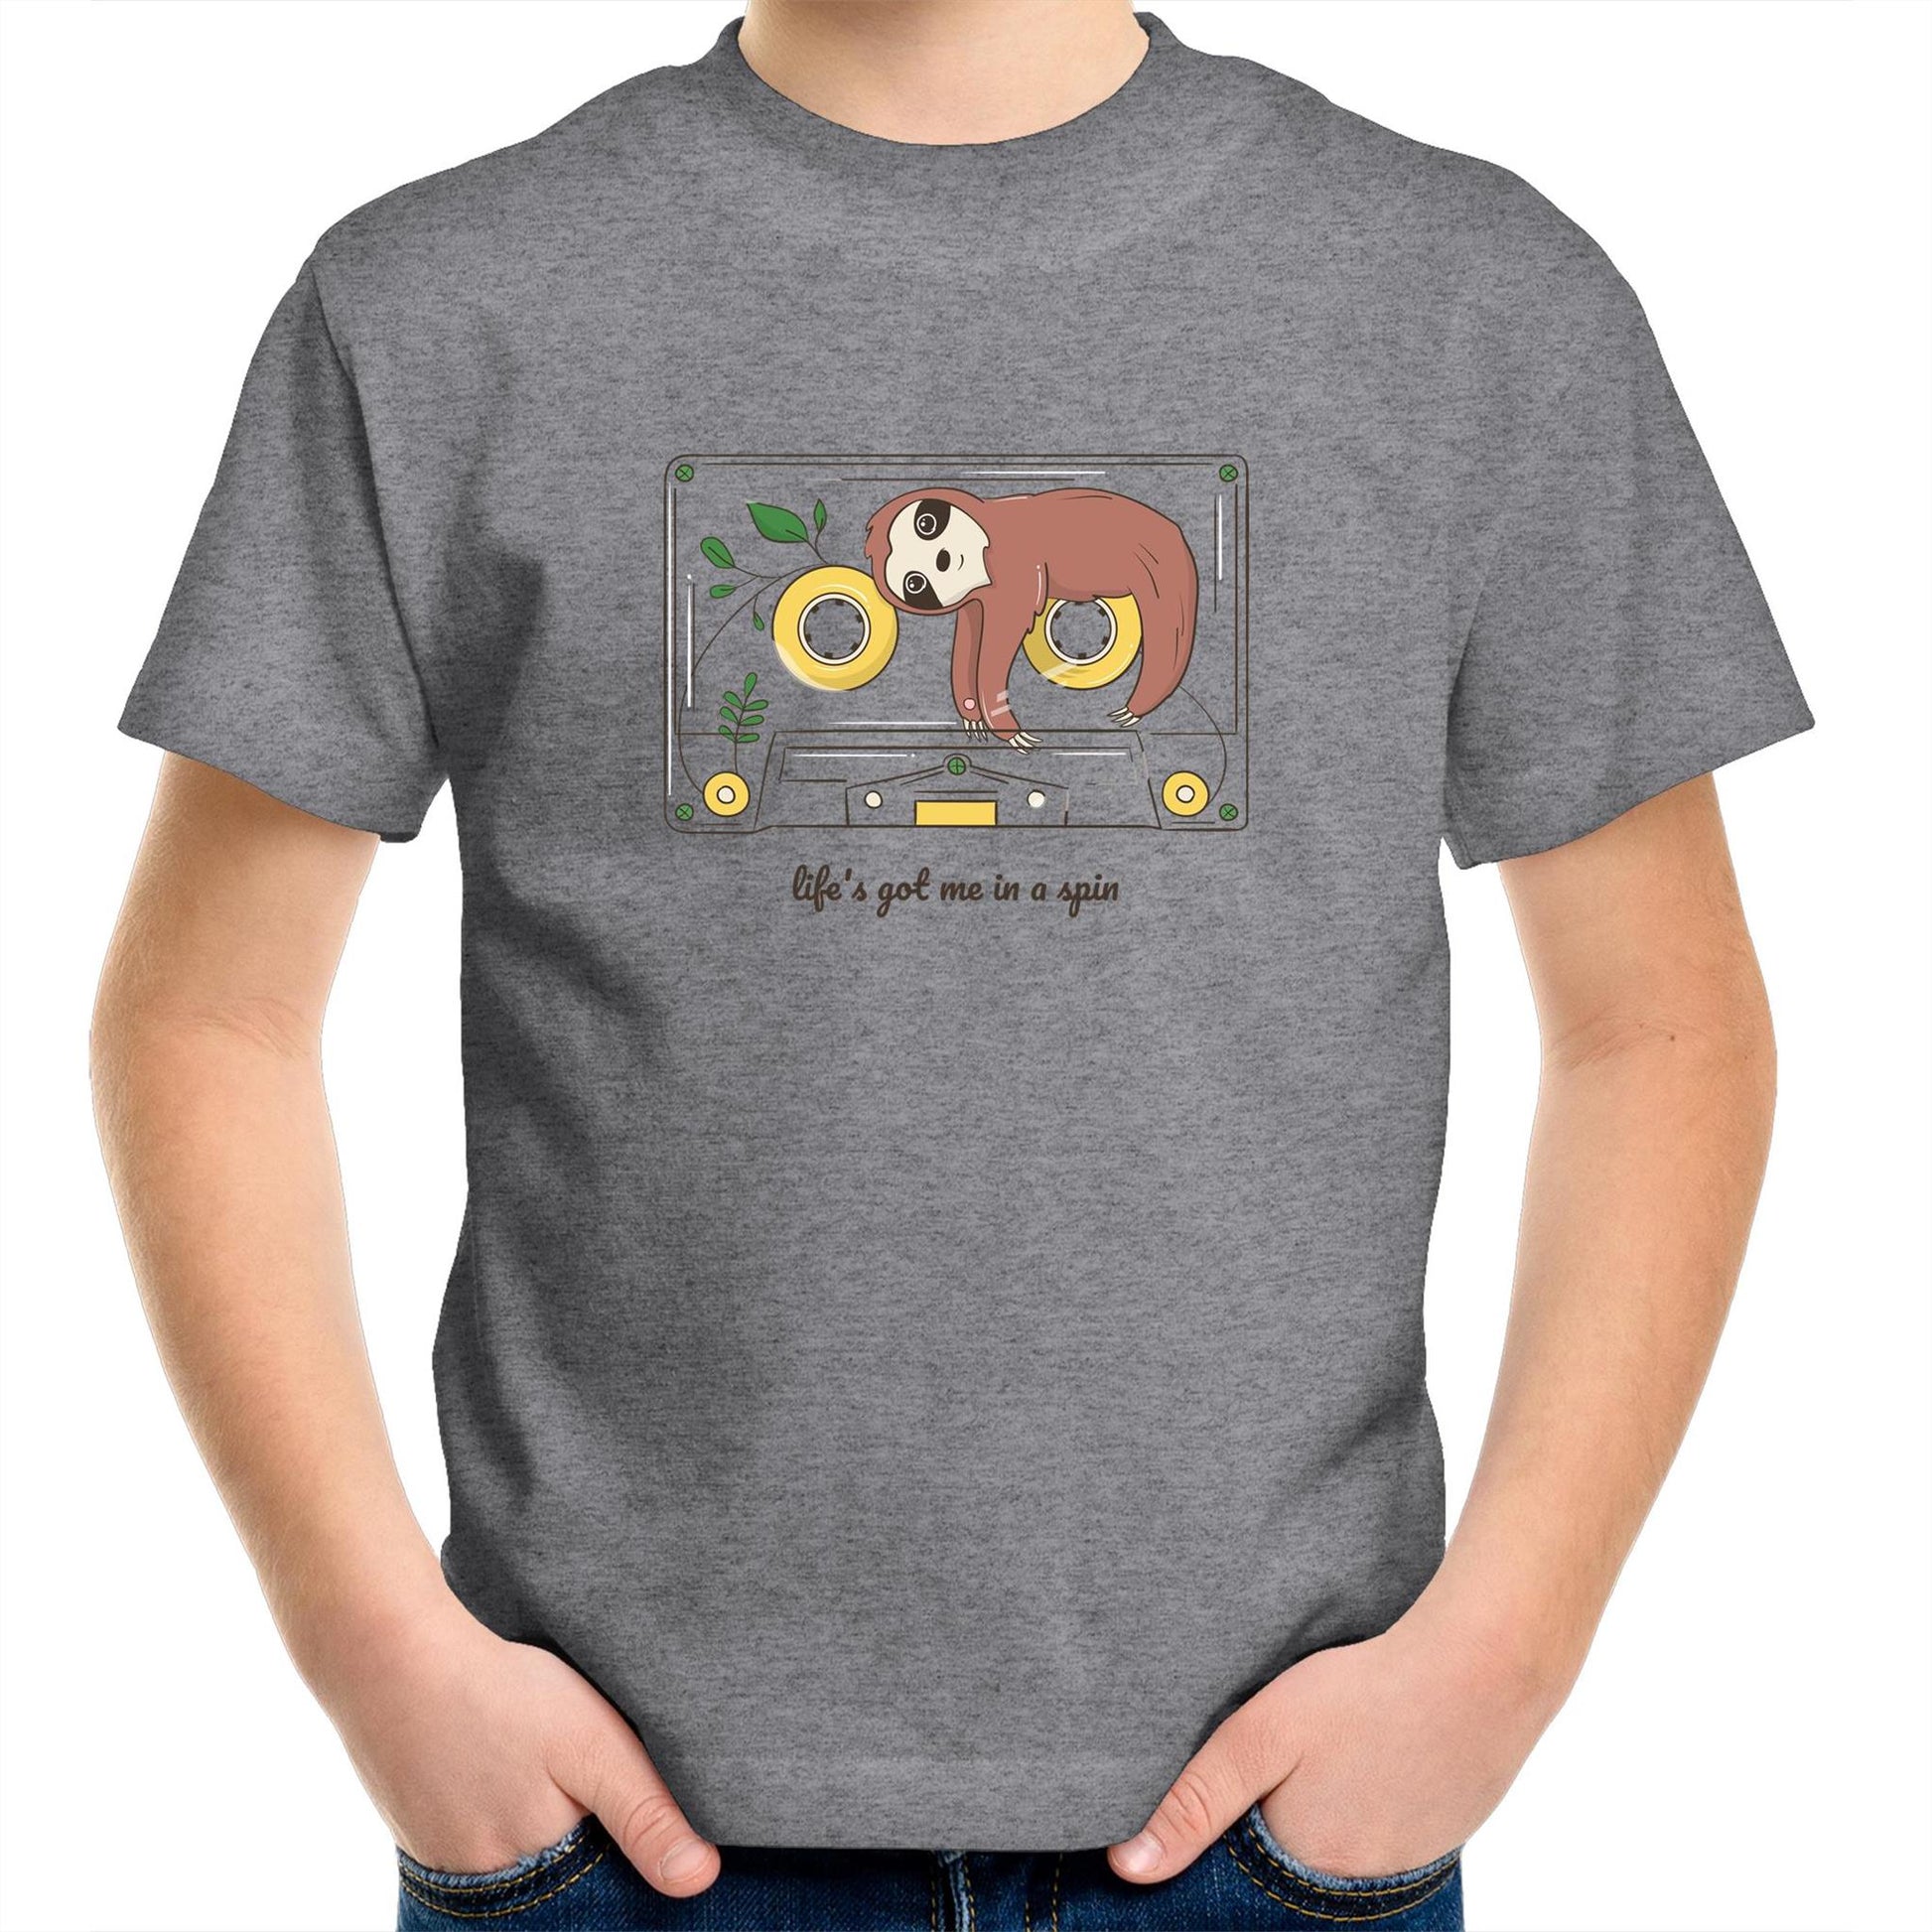 Cassette, Life's Got Me In A Spin - Kids Youth Crew T-Shirt Grey Marle Kids Youth T-shirt animal Music Retro